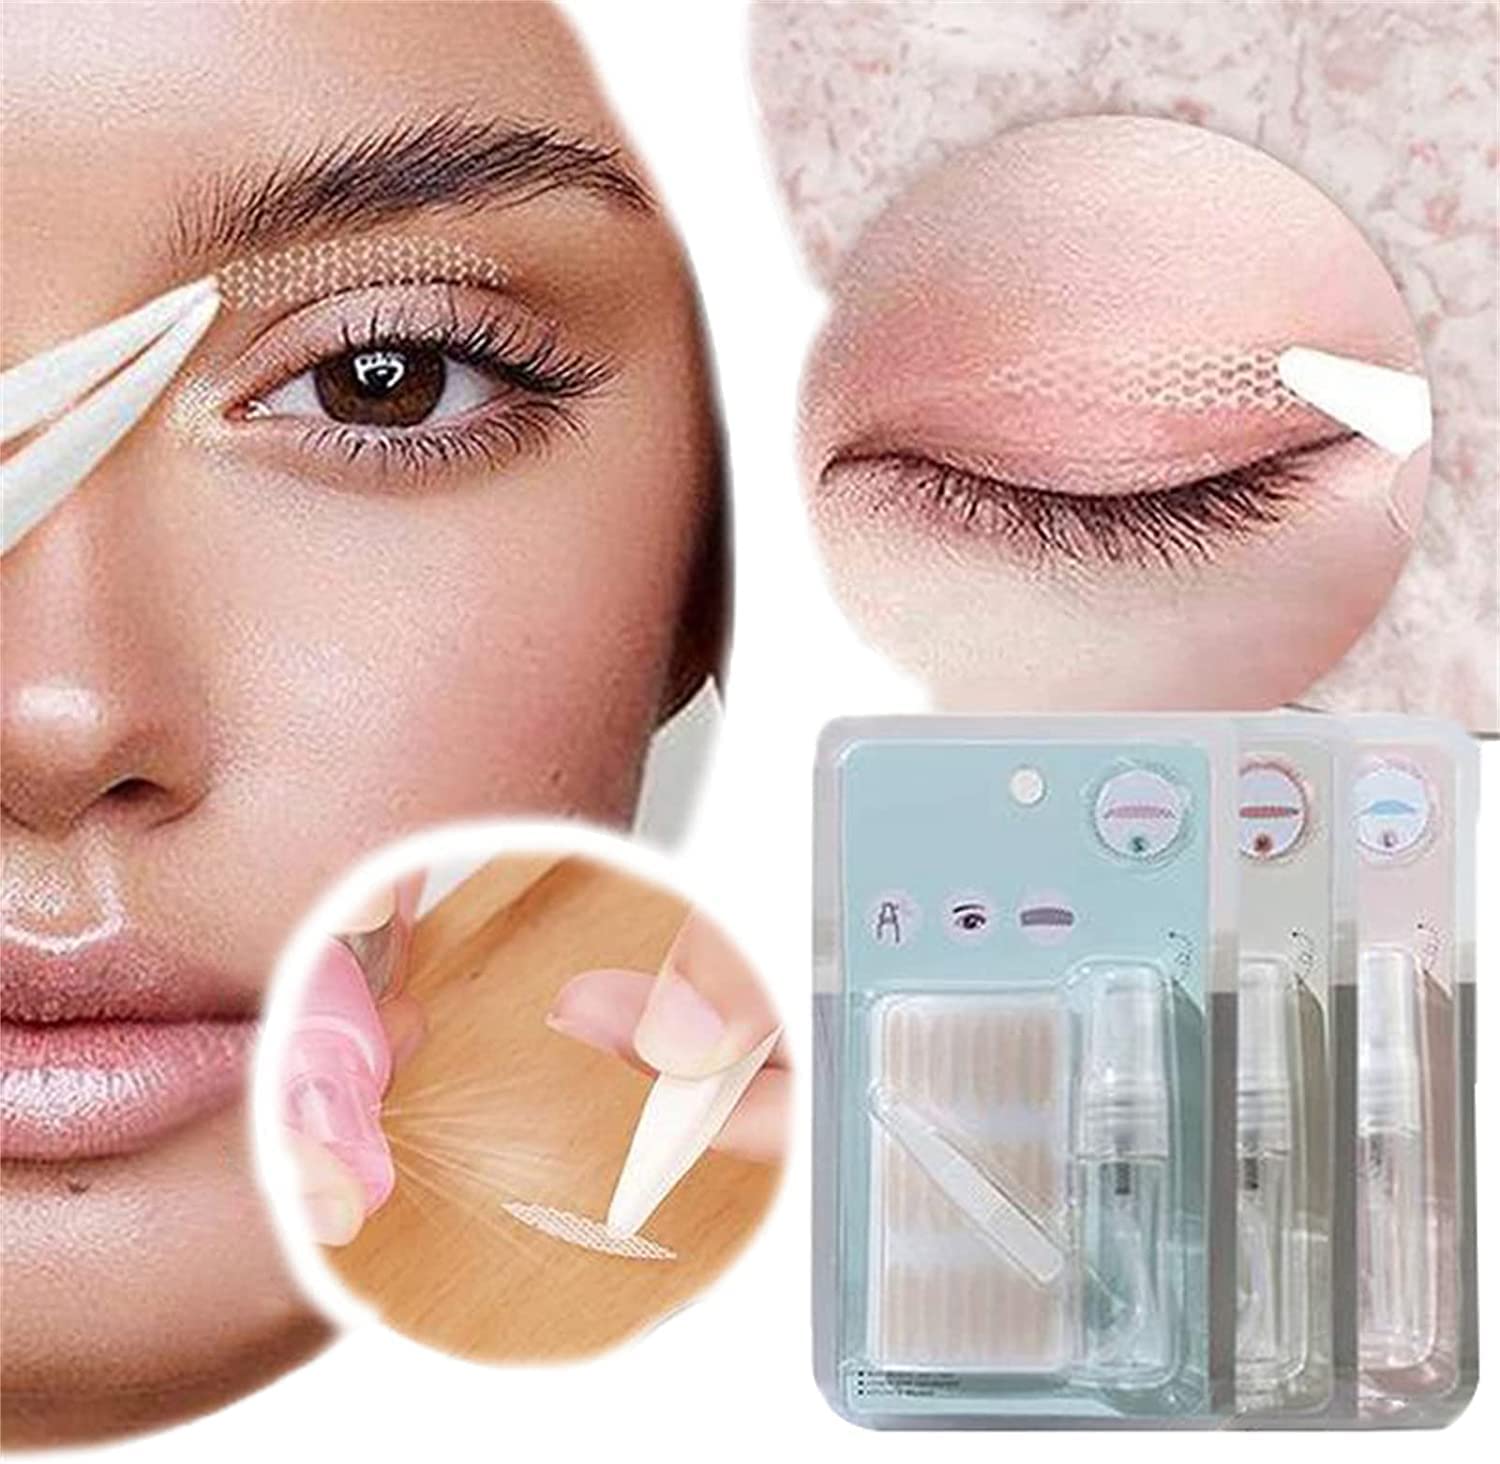 INVISIBLE EYE LIFTING BY DOUBLE EYELID TAPE